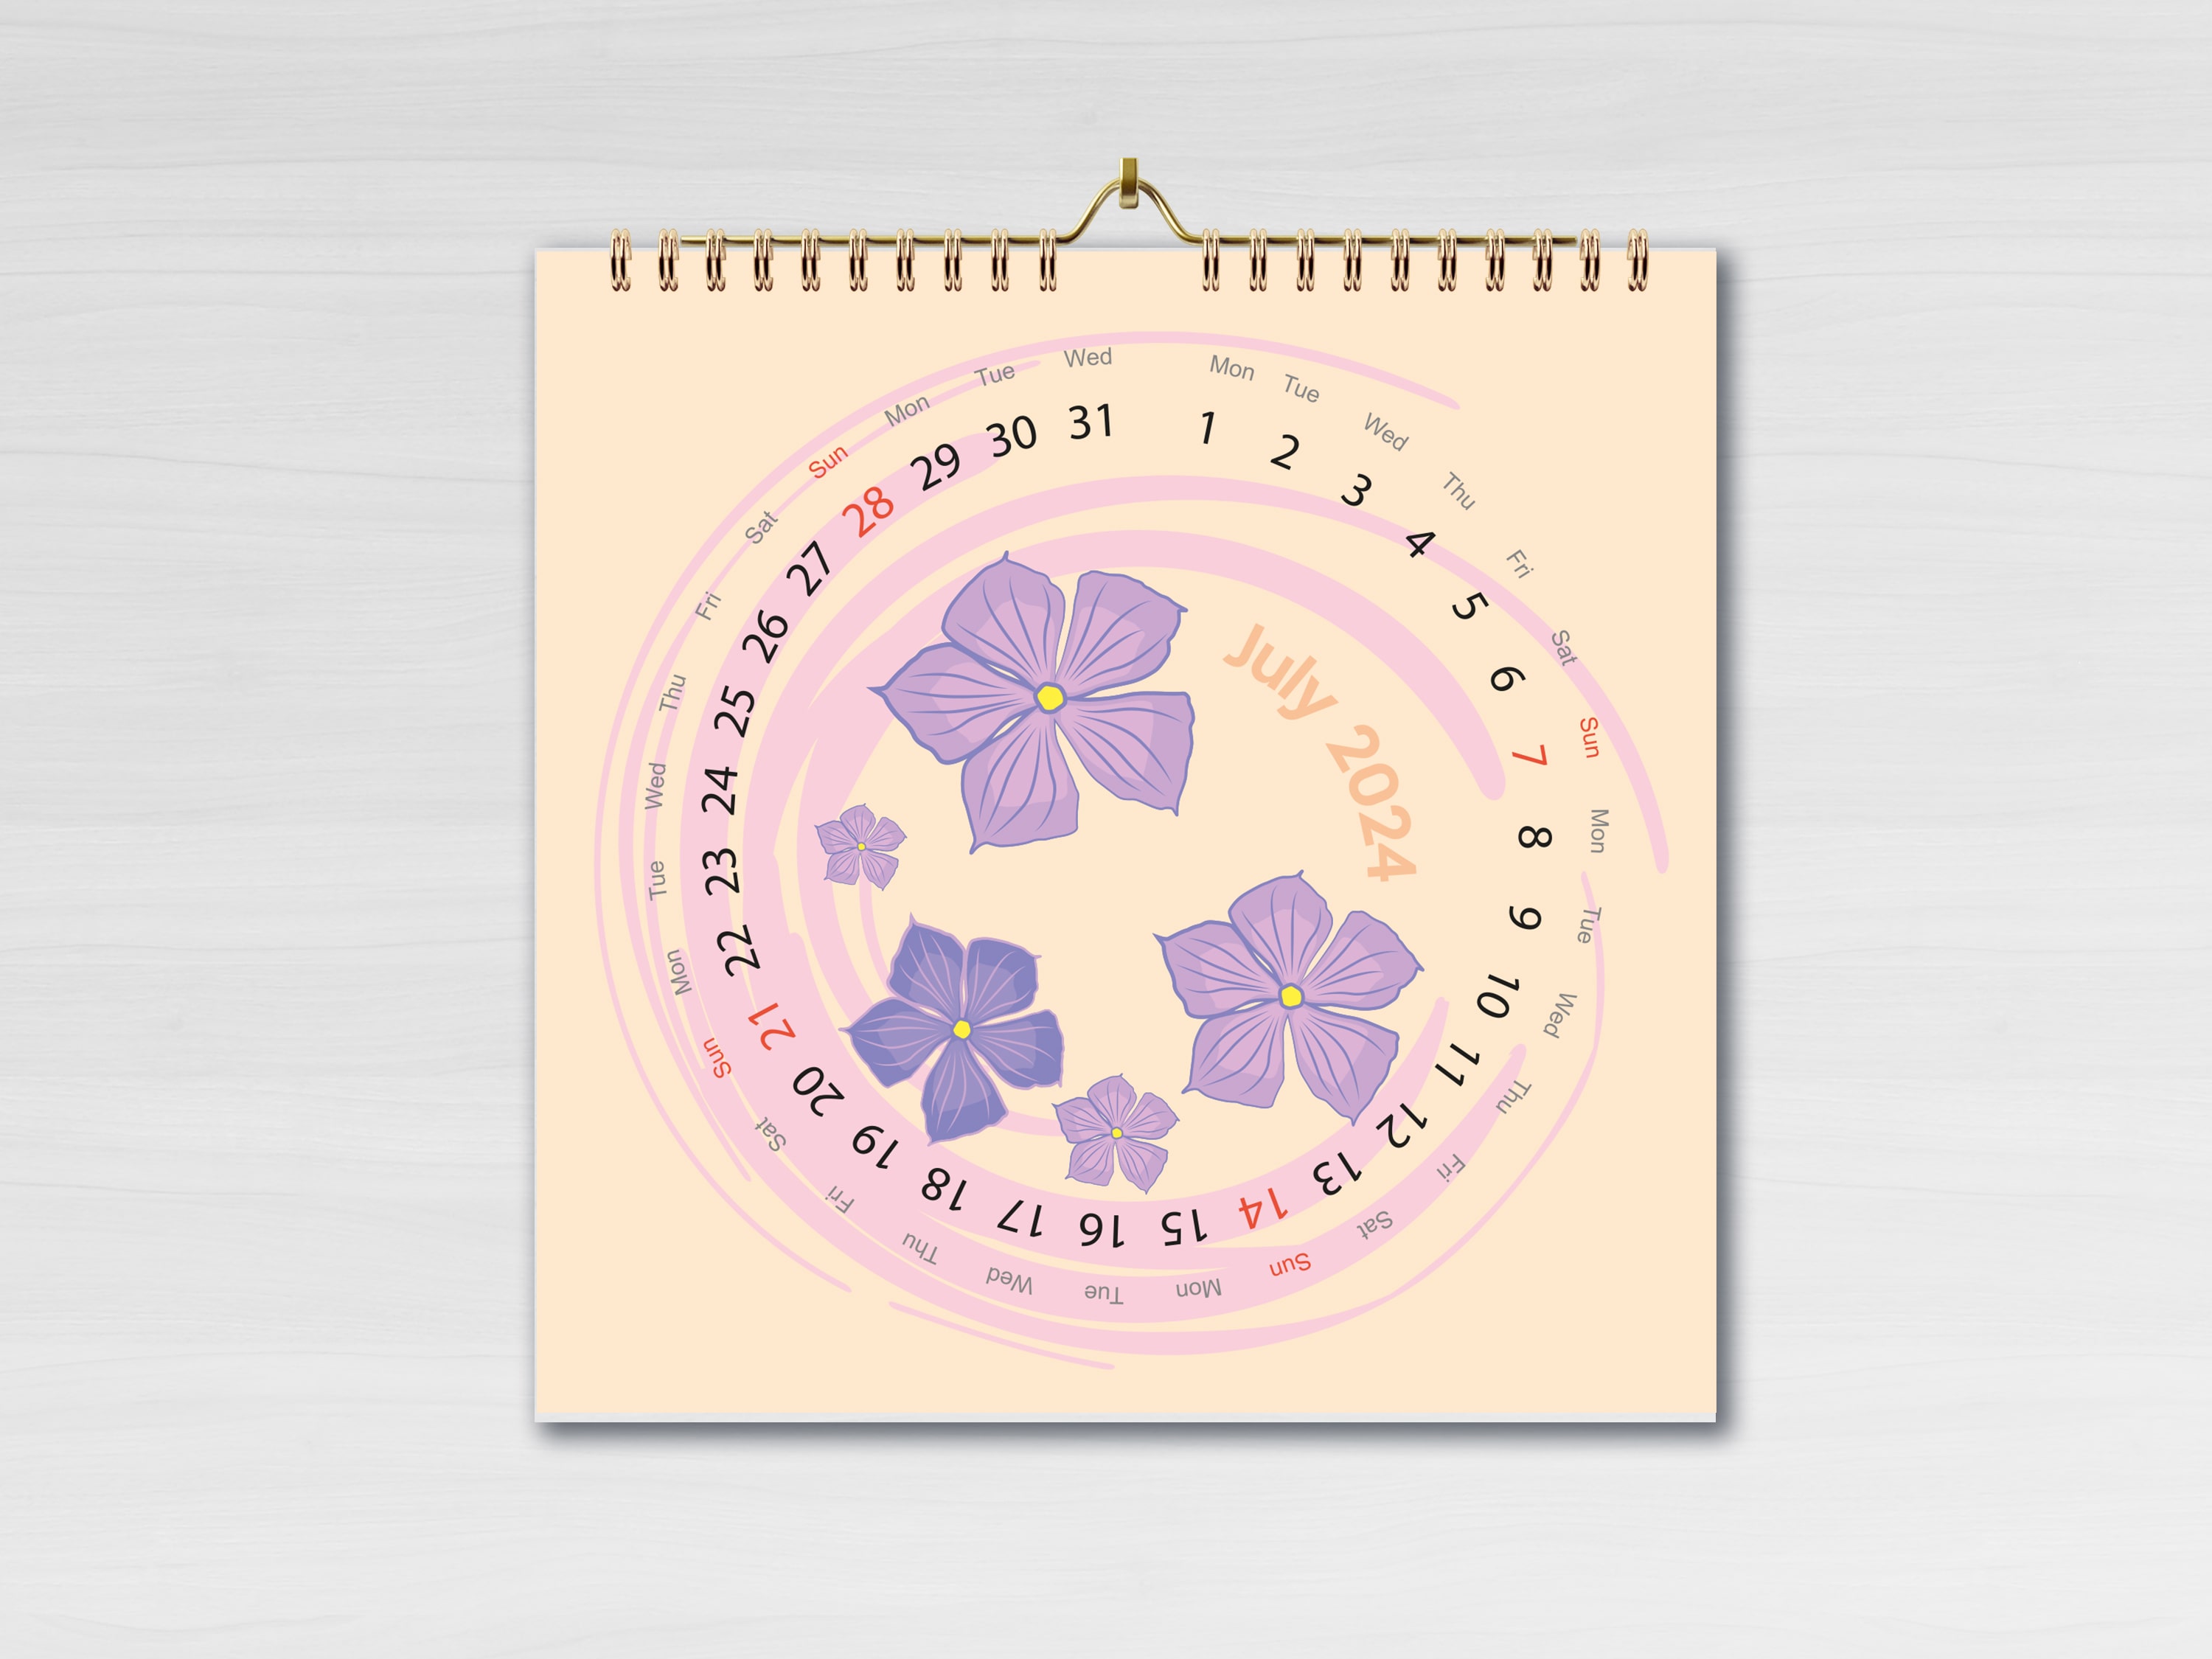 calendar 2024 numbers around the circle floral elements editable square pages 297x297 mm 3 min 806